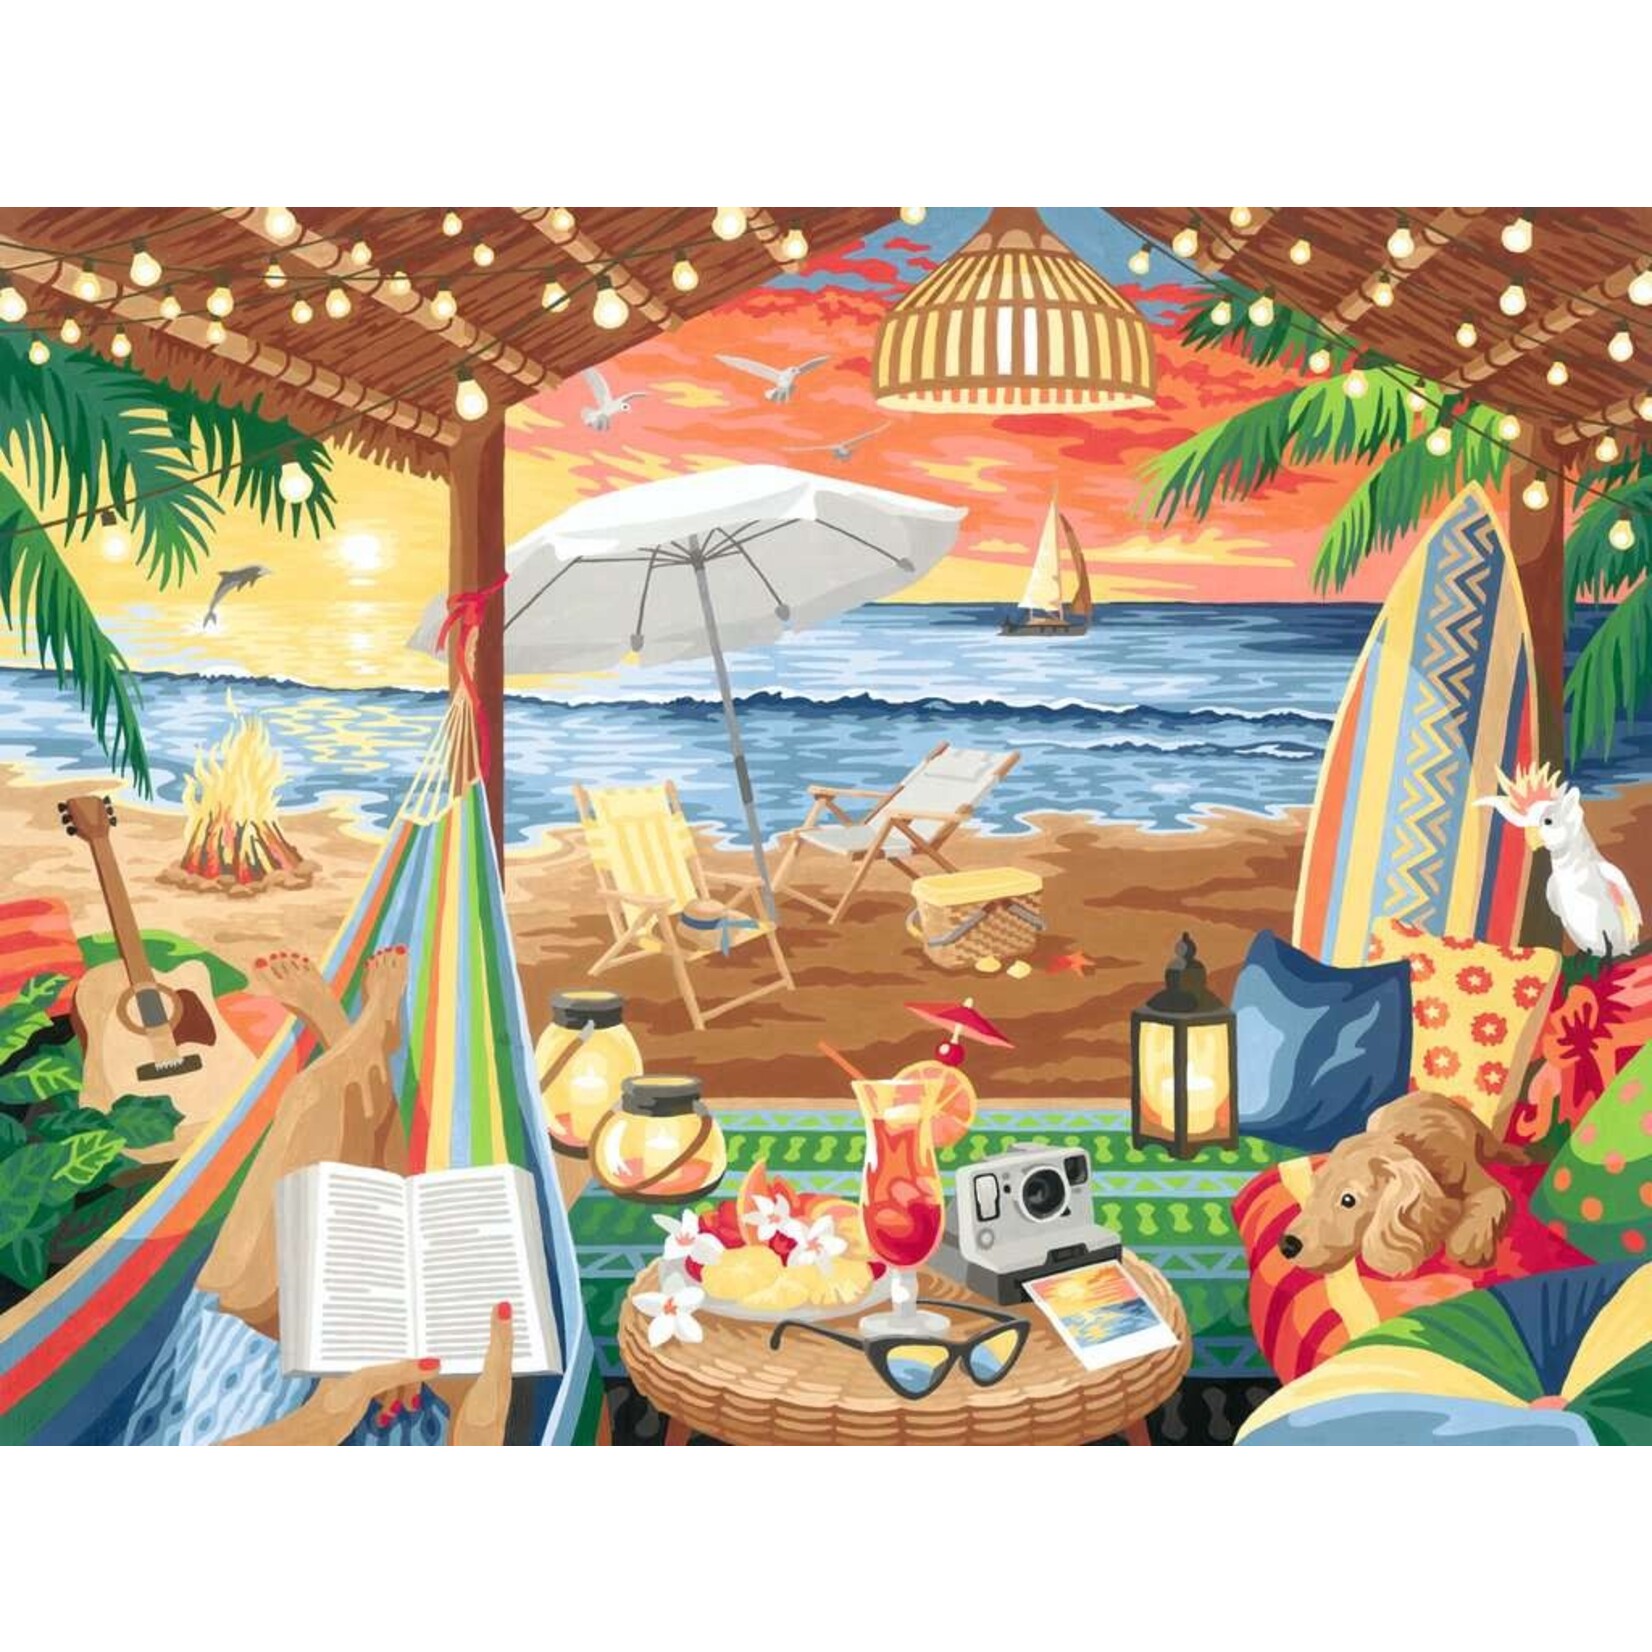 CreArt: Cozy Cabana 12x16 Paint by Number